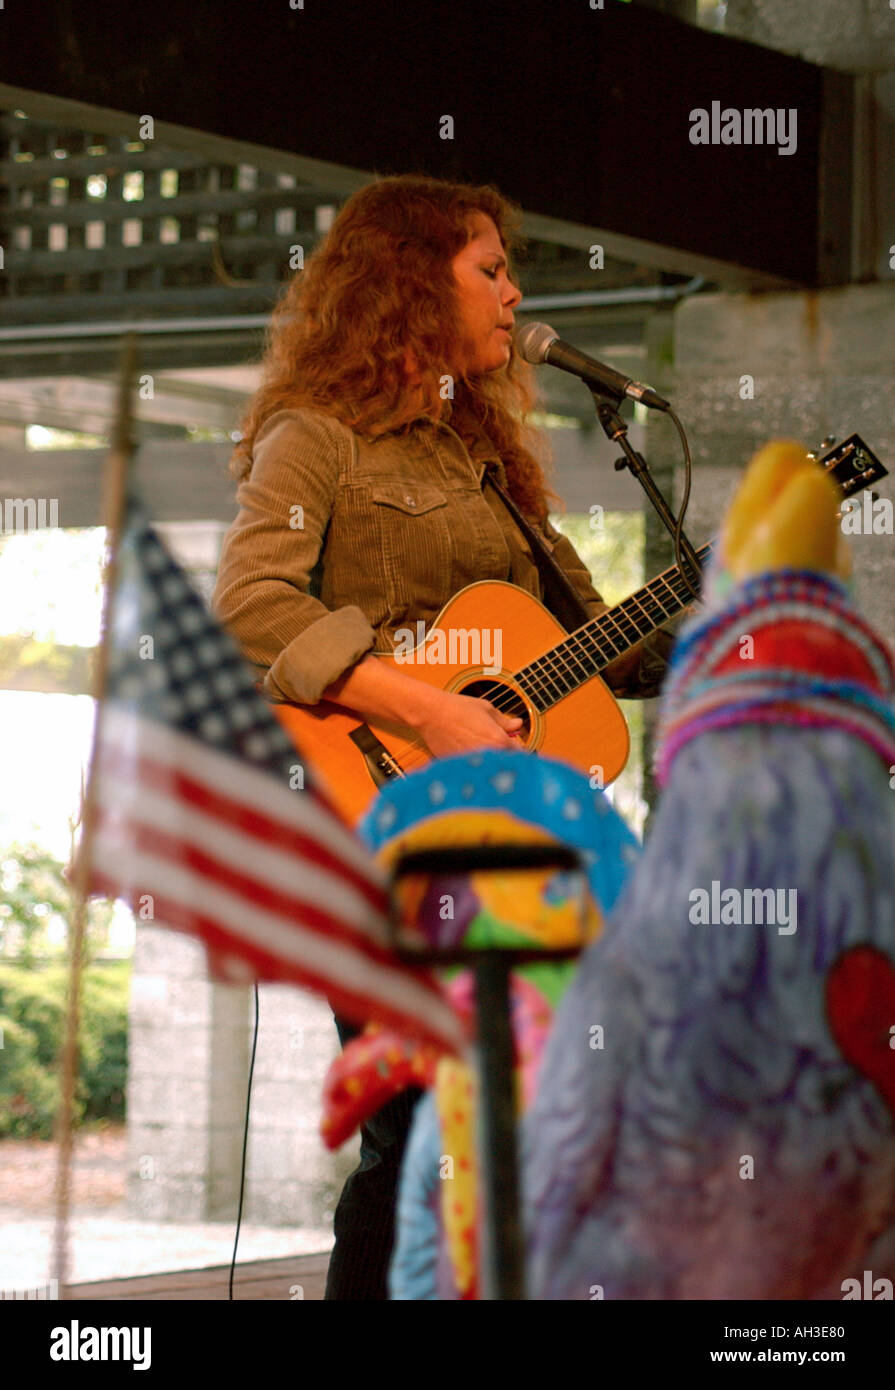 Sultry Caucasian Female Singer Rebecca Folson Performing With US Flag Behind Her at Outdoor Concert Editorial Use Only USA Stock Photo